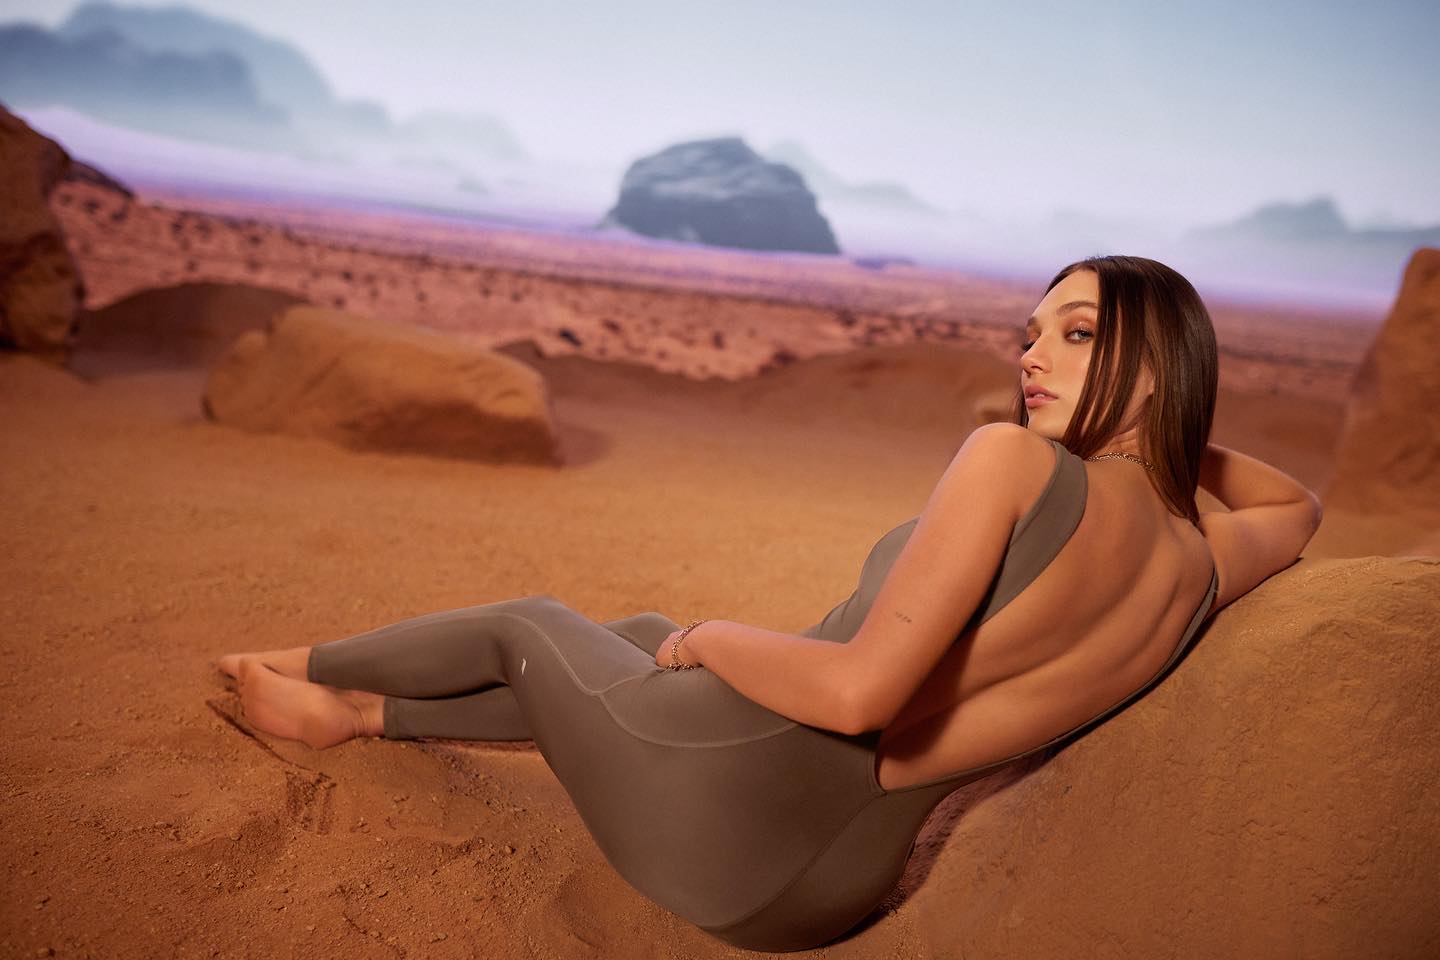 Photos n°5 : Maddie Ziegler Goes to The Desert With New Fabletics Line!